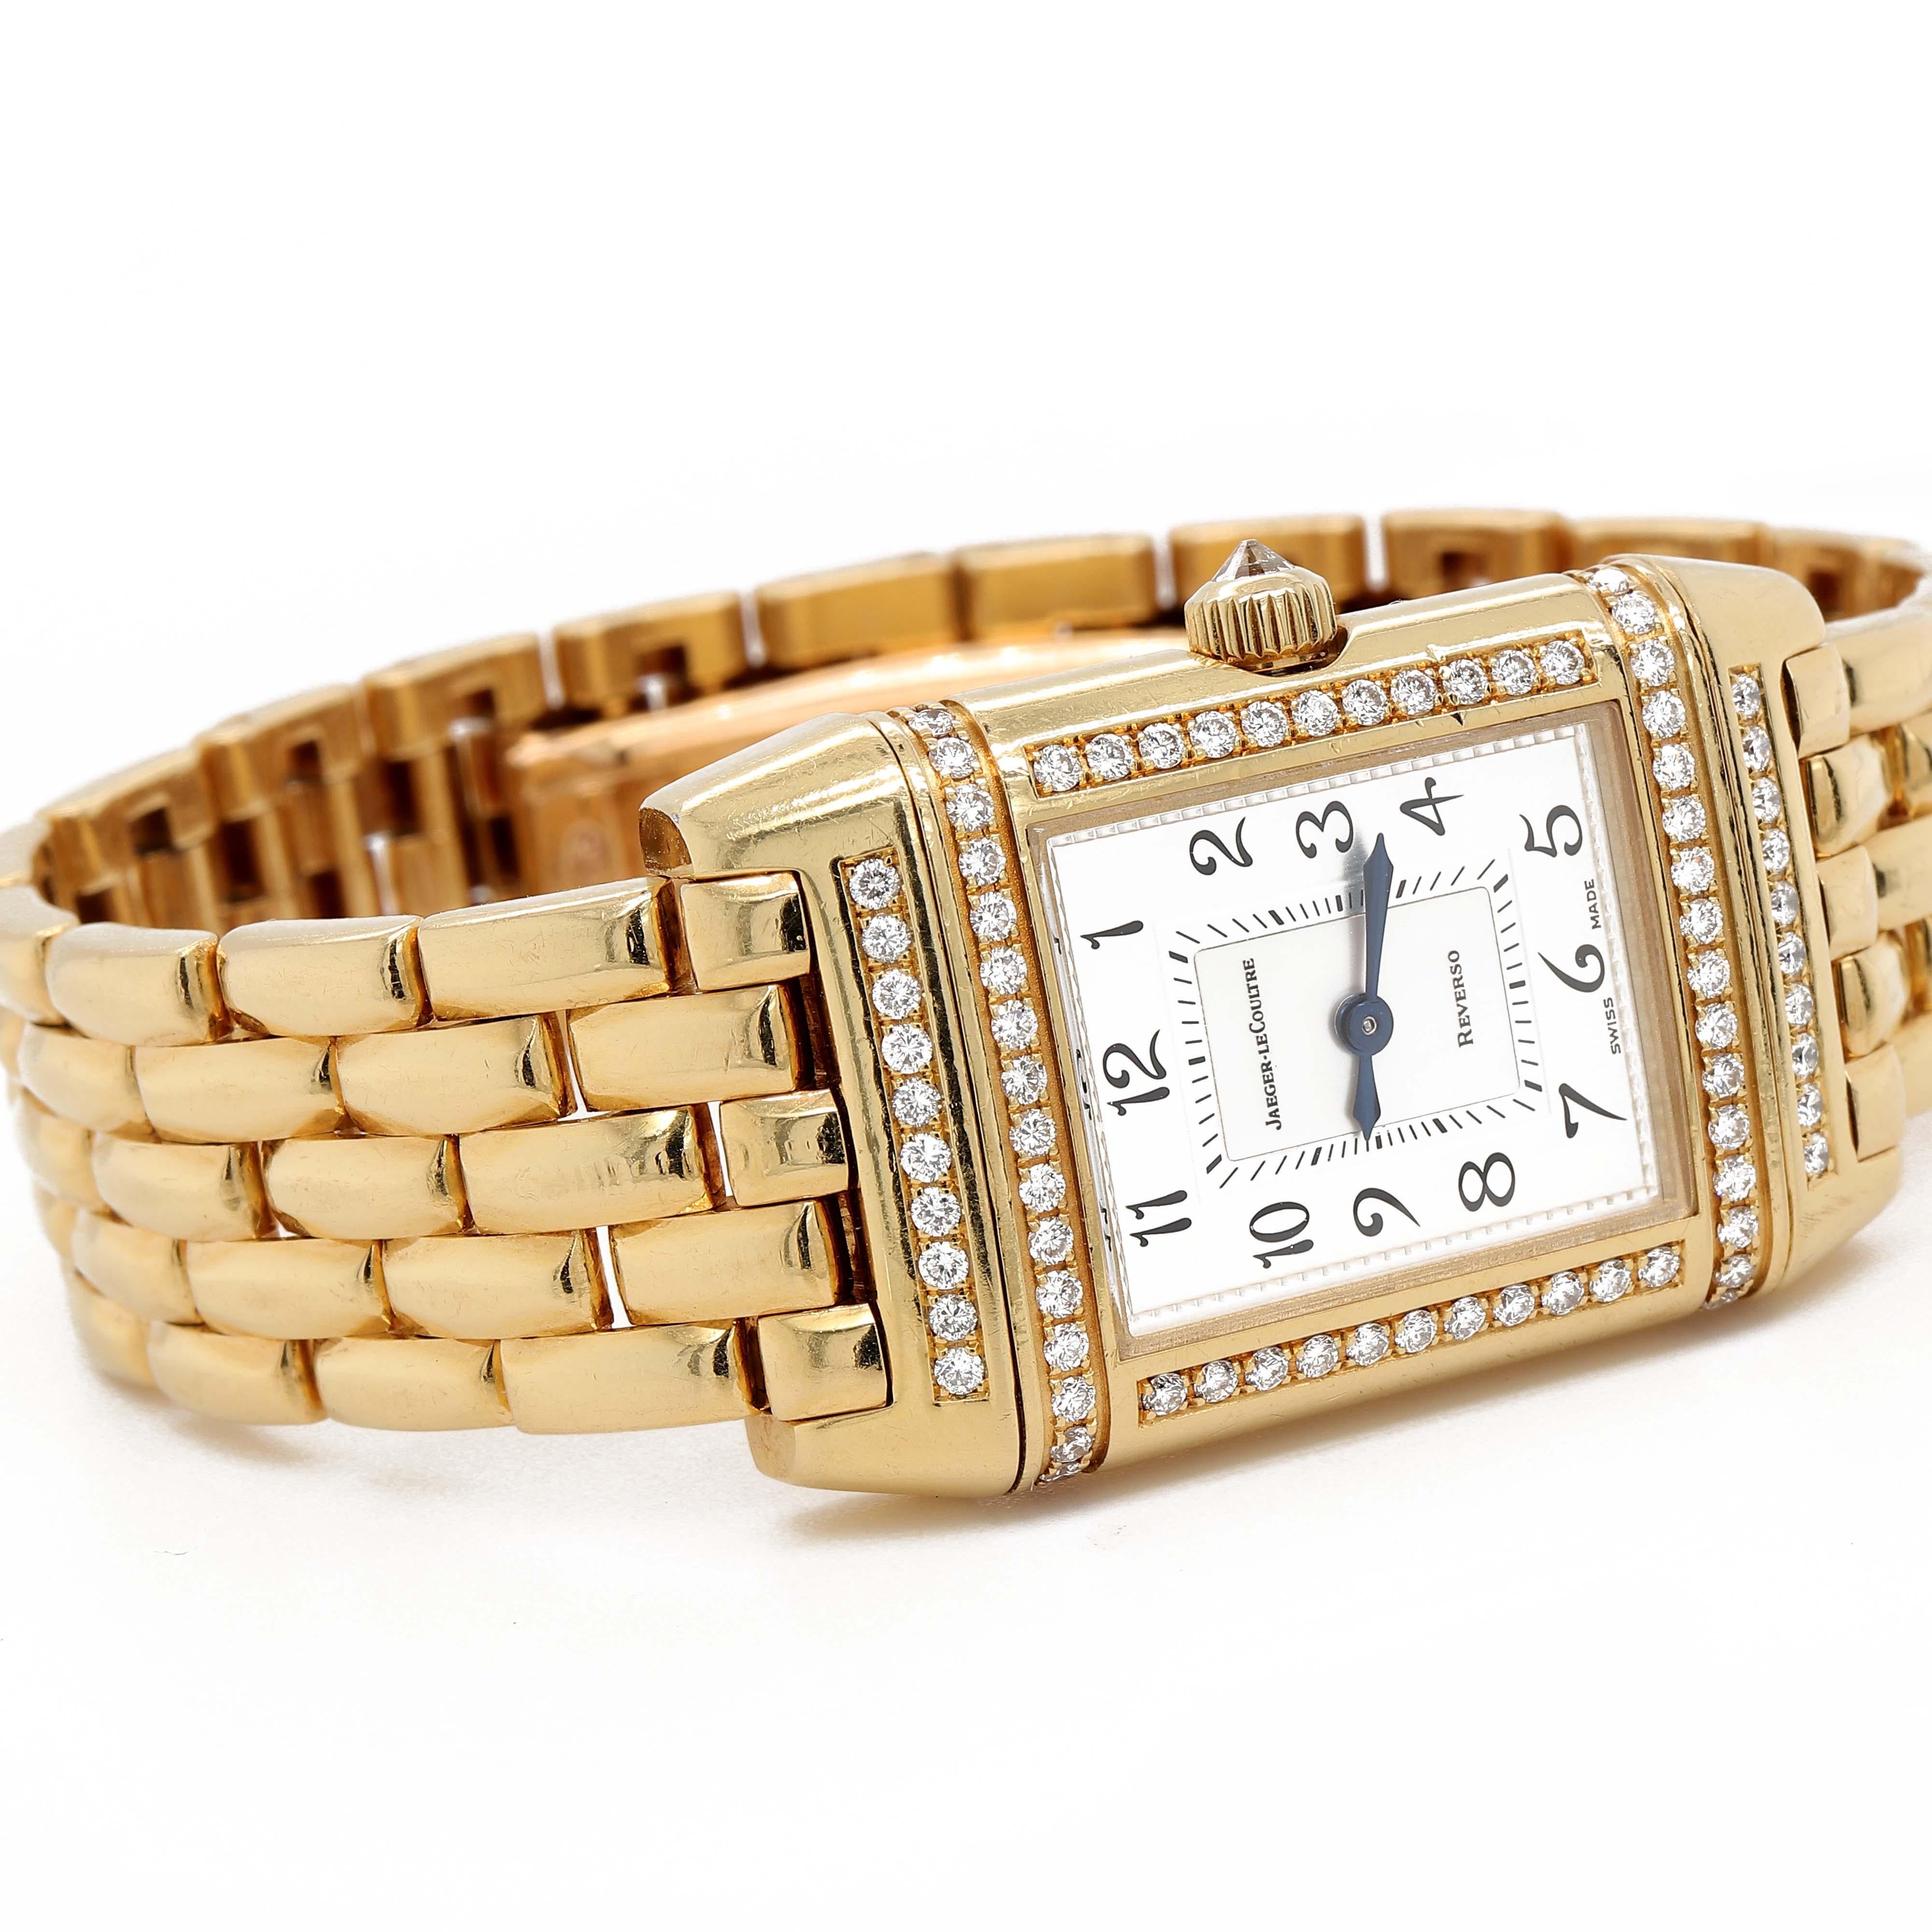 Jaeger-LeCoultre Reverso-Duetto Watch in 18k Yellow Gold For Sale 1